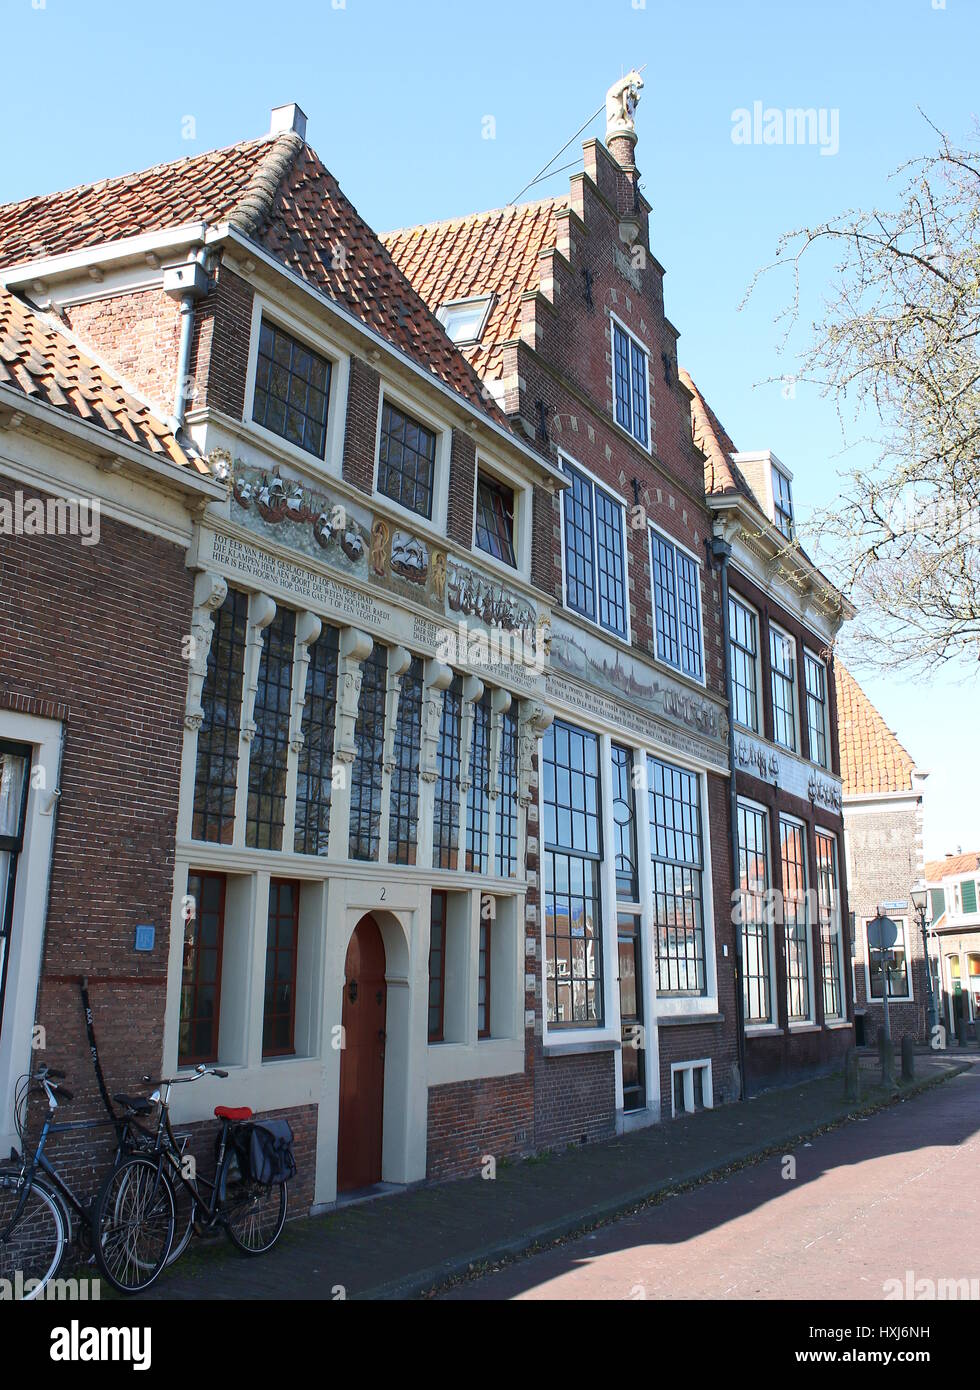 17th century Bossuhuizen (Houses of Bossu), Hoorn, Netherlands with gablestones depicting the Battle on the Zuiderzee in 1573 against the Spanish. Stock Photo